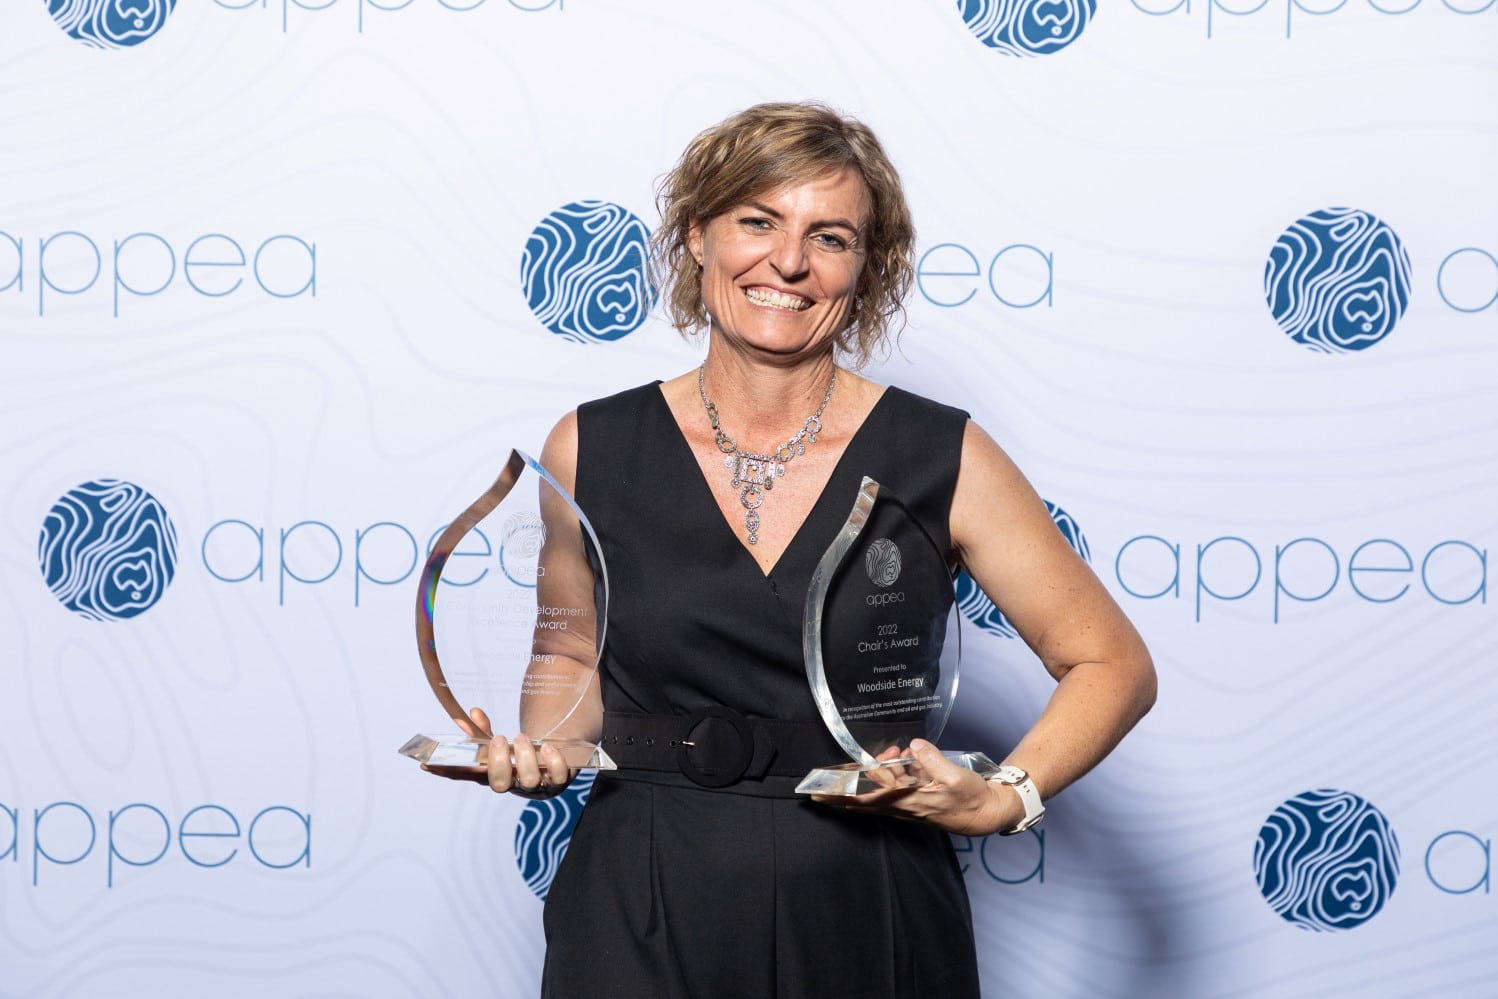 Media Release: APPEA Excellence Awards honour environment, safety, workforce and community initiatives